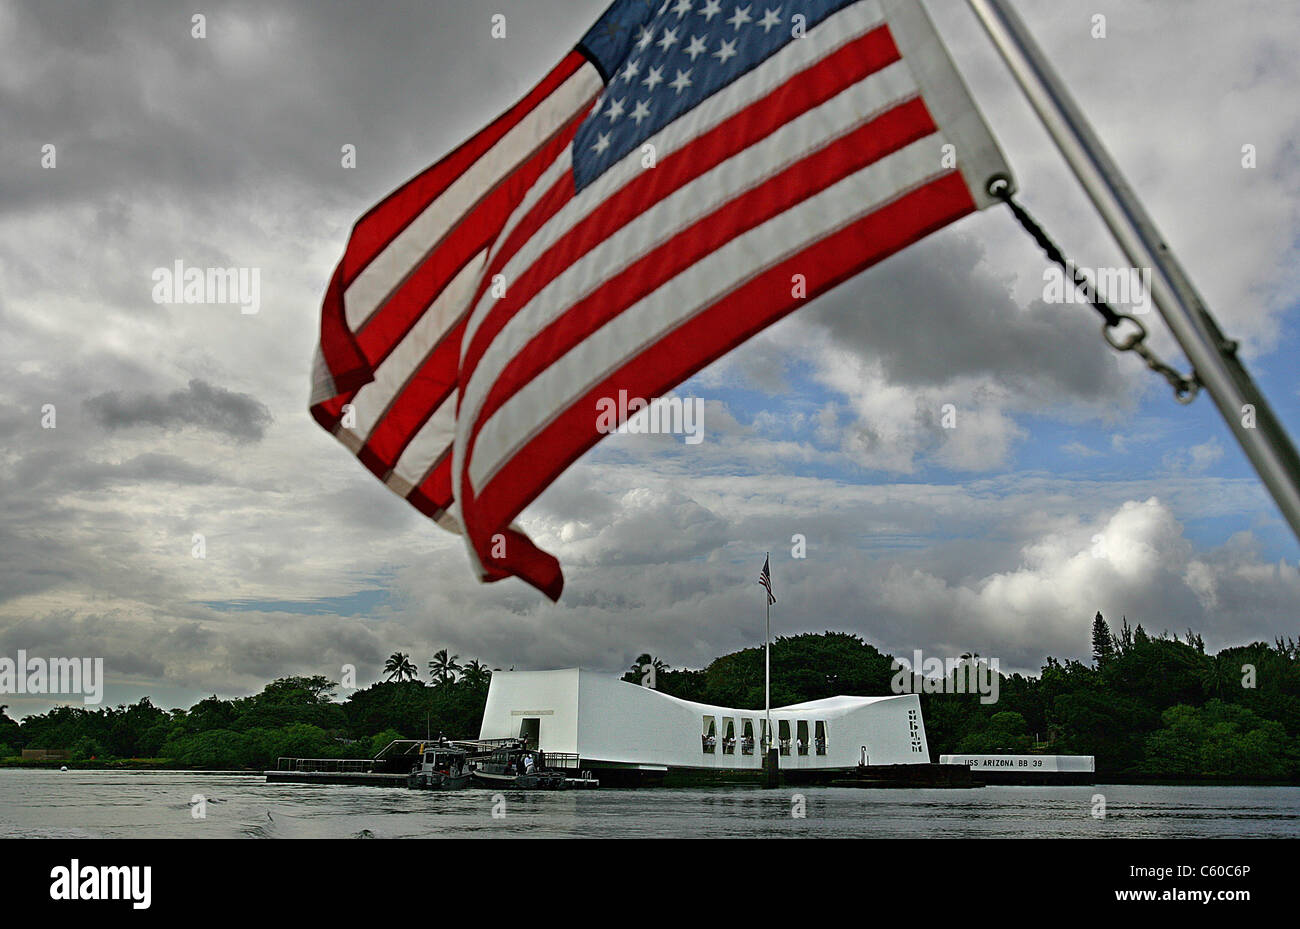 American flag waves iover Pearl Harbor en route to the USS Arizona memorial via boat Stock Photo